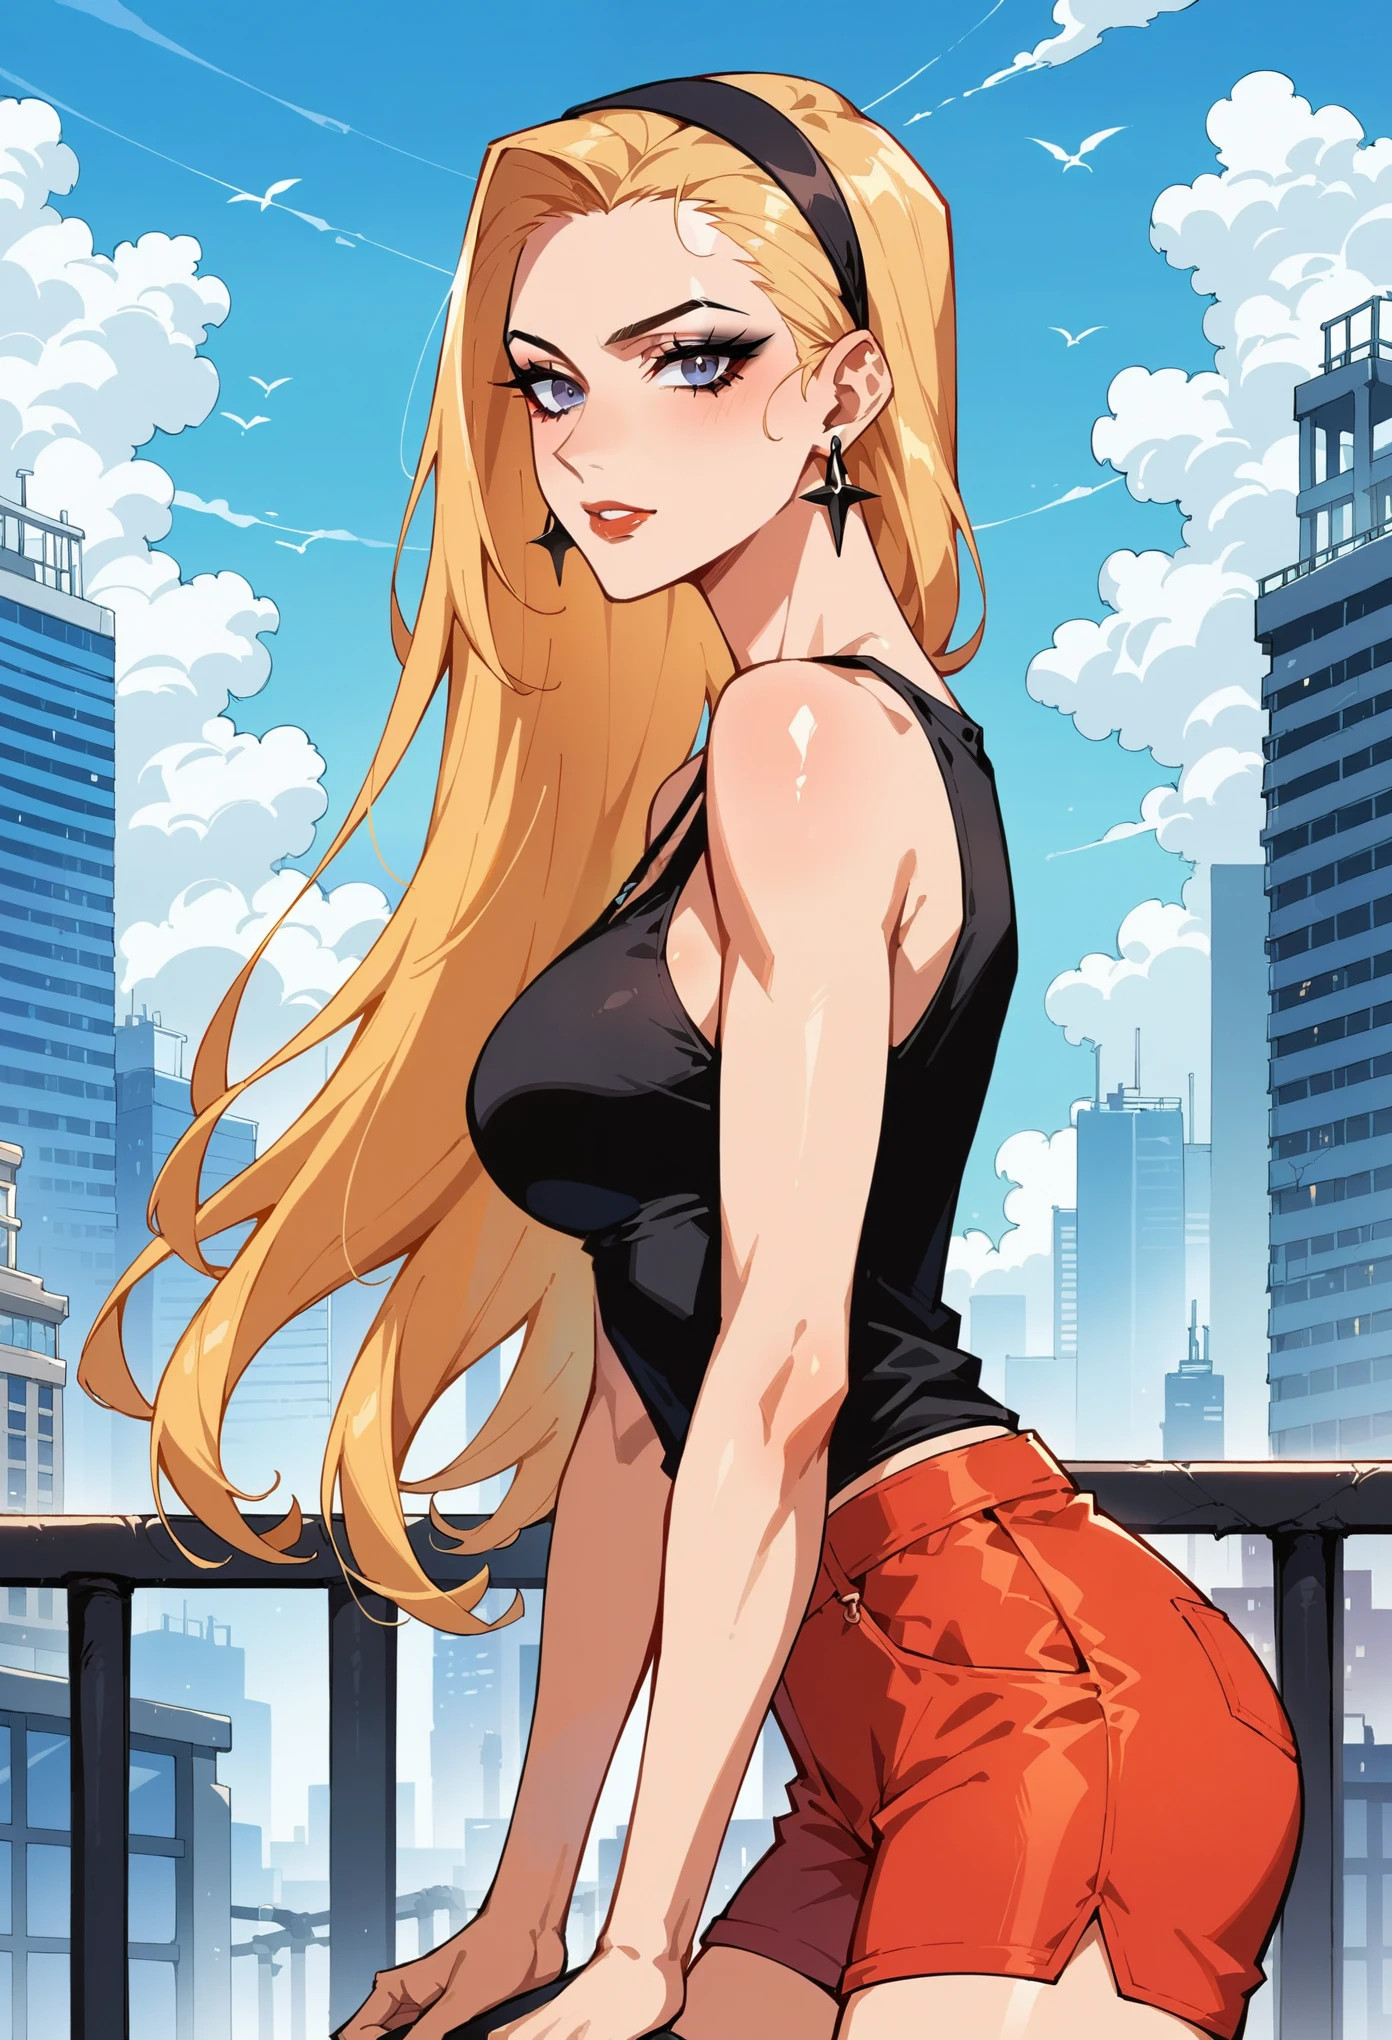 Score_9, score_8_up, score_7_up, rating_safe, adult woman, tight black cami tank top:1.2, very pale skin, earrings, long blonde hair, hairband, black makeup, red shorts, source_anime, city background, looking at viewer, grinning